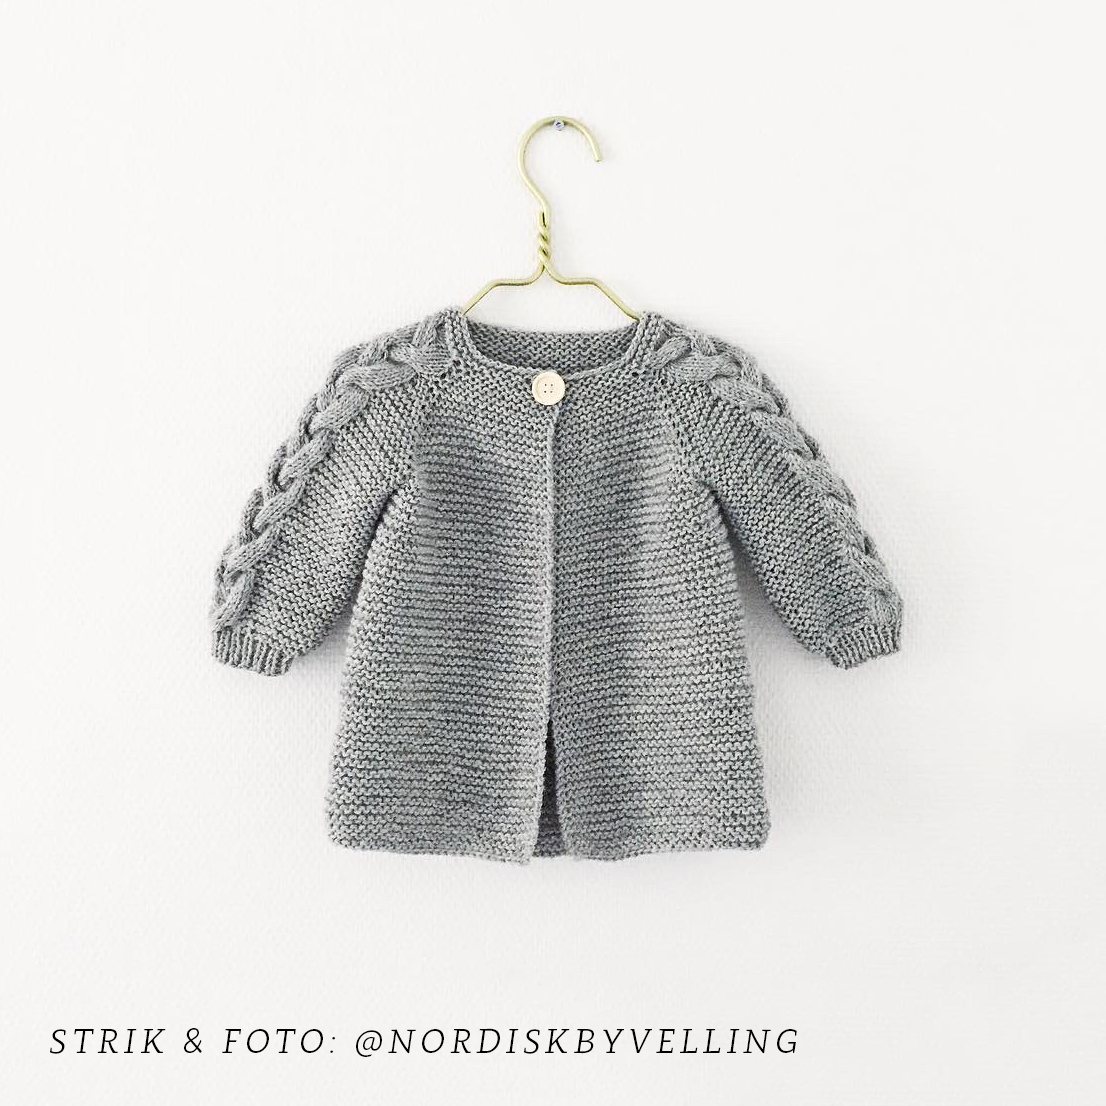 Nordic Spring – Knit By TrineP